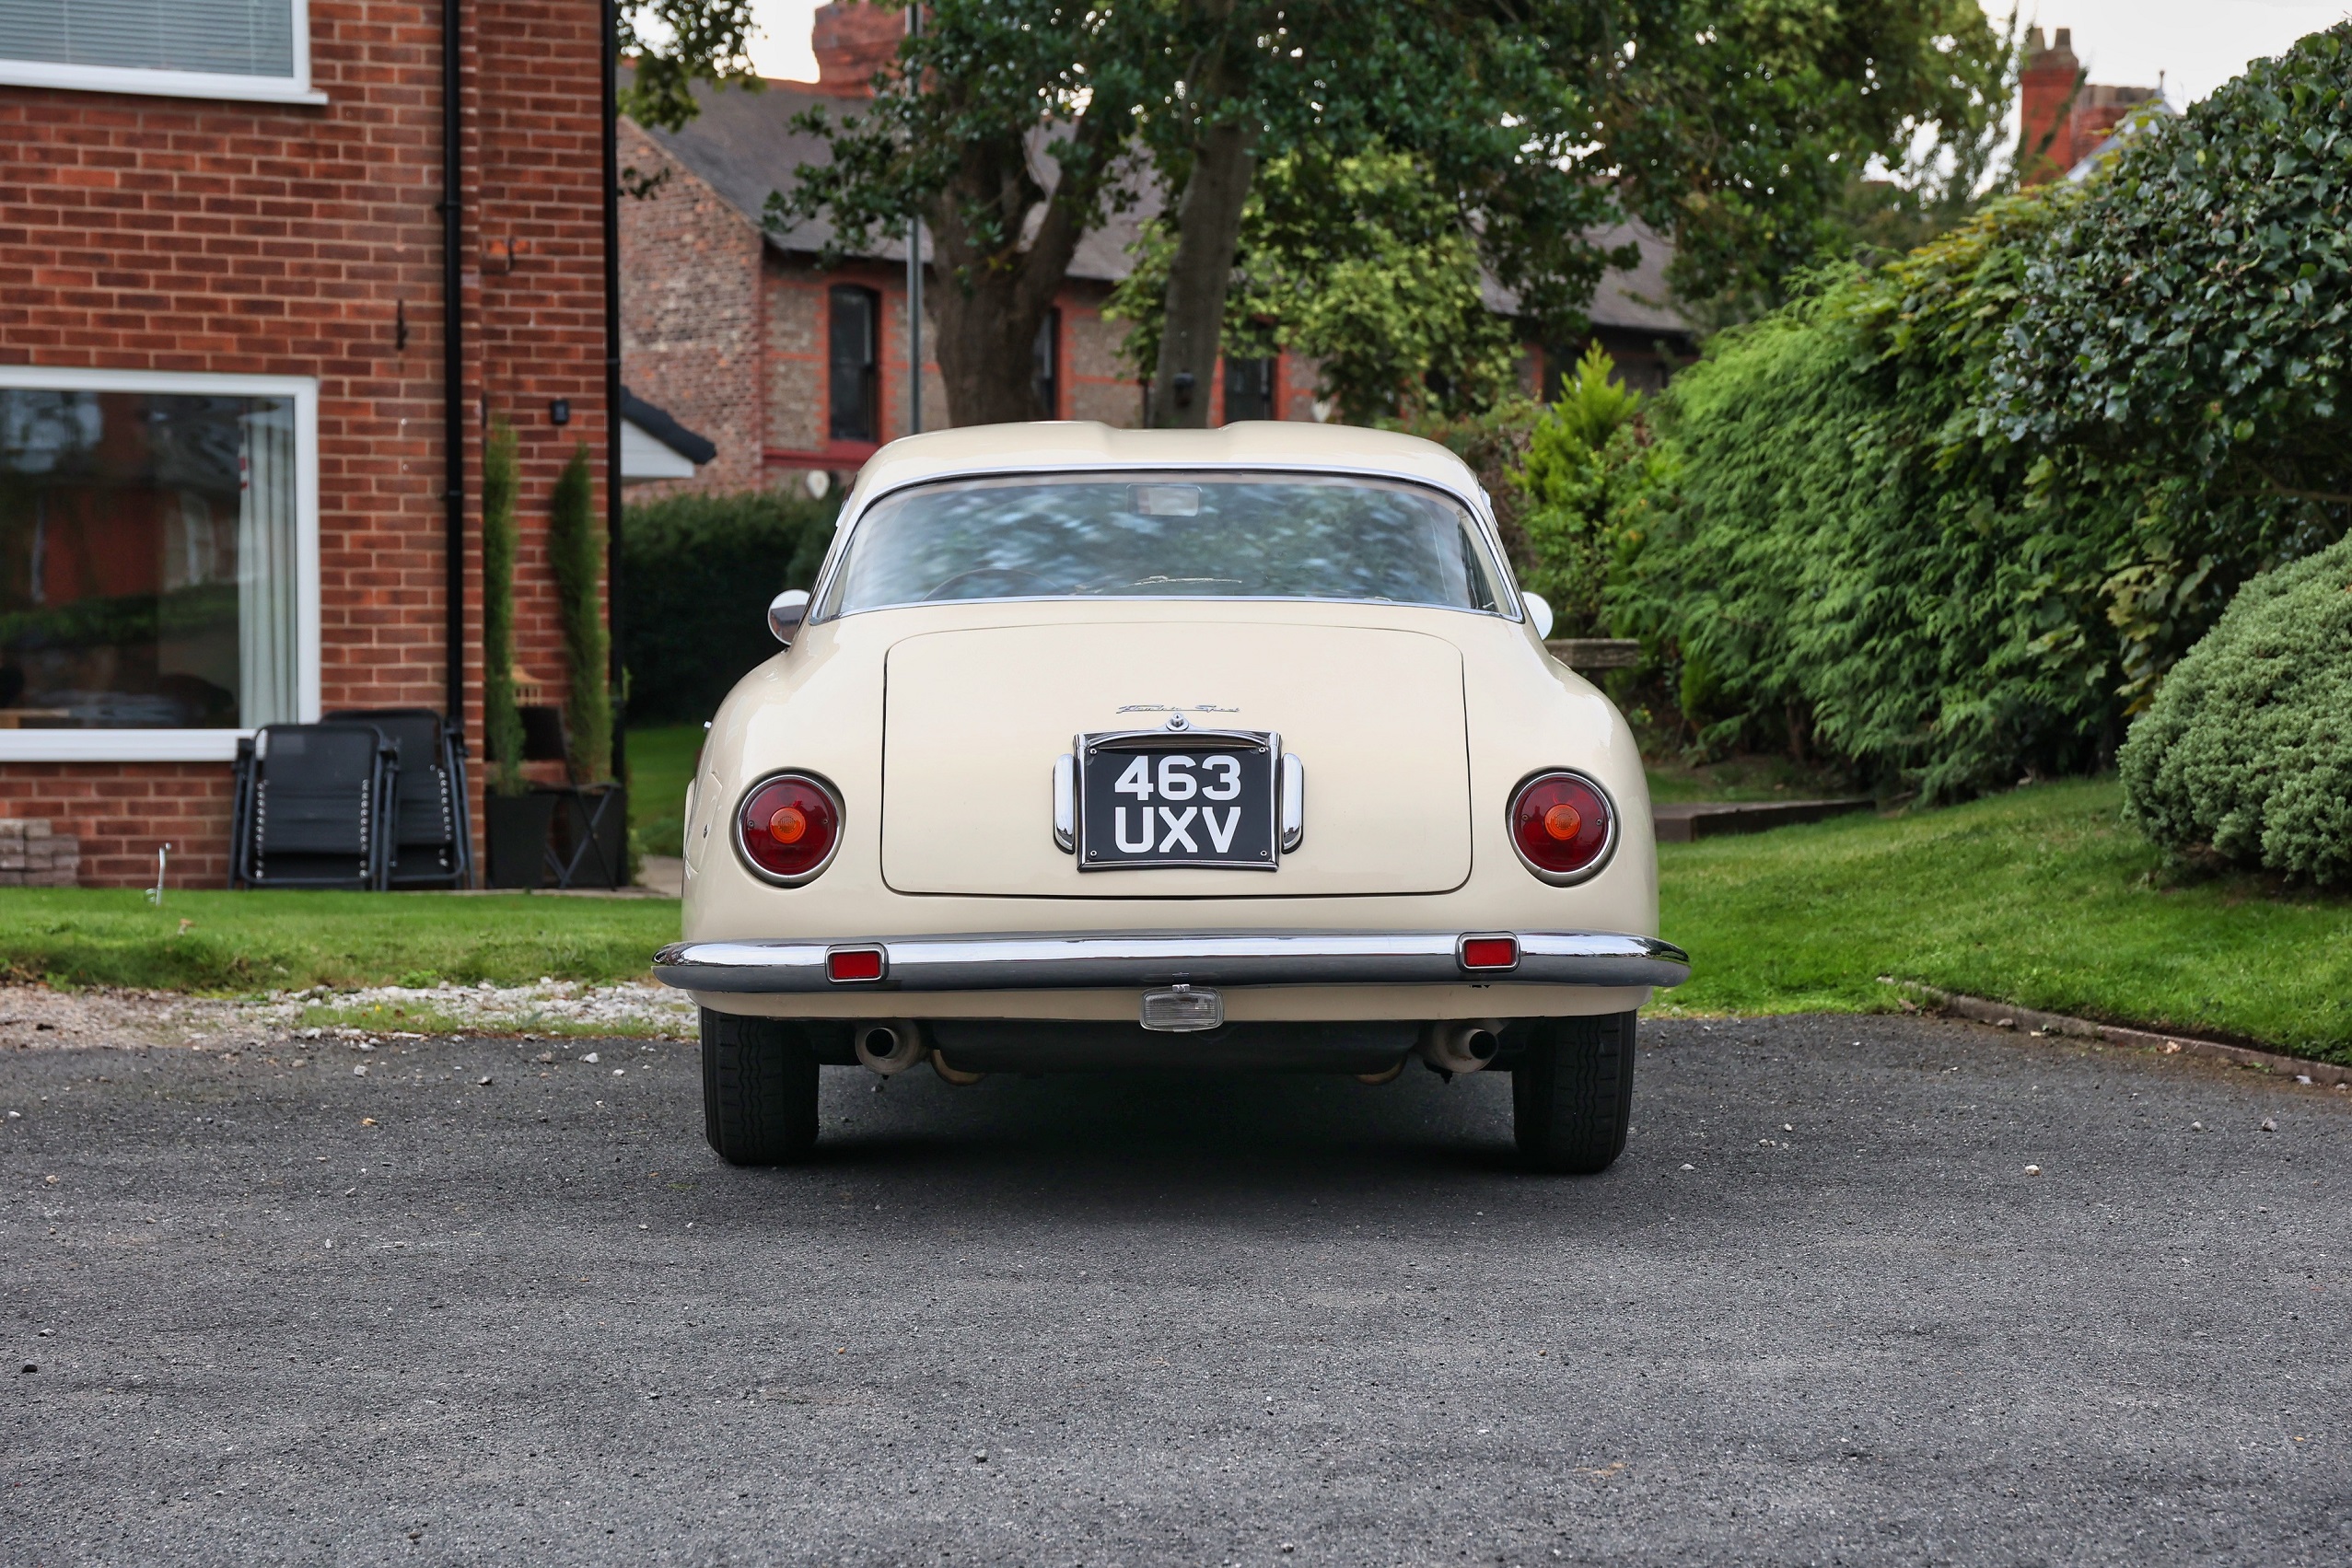 1962 LANCIA FLAMINIA SPORT 3C 2.5-LITRE COUPÉ Registration Number: 463 UXV Chassis Numb - Image 6 of 21